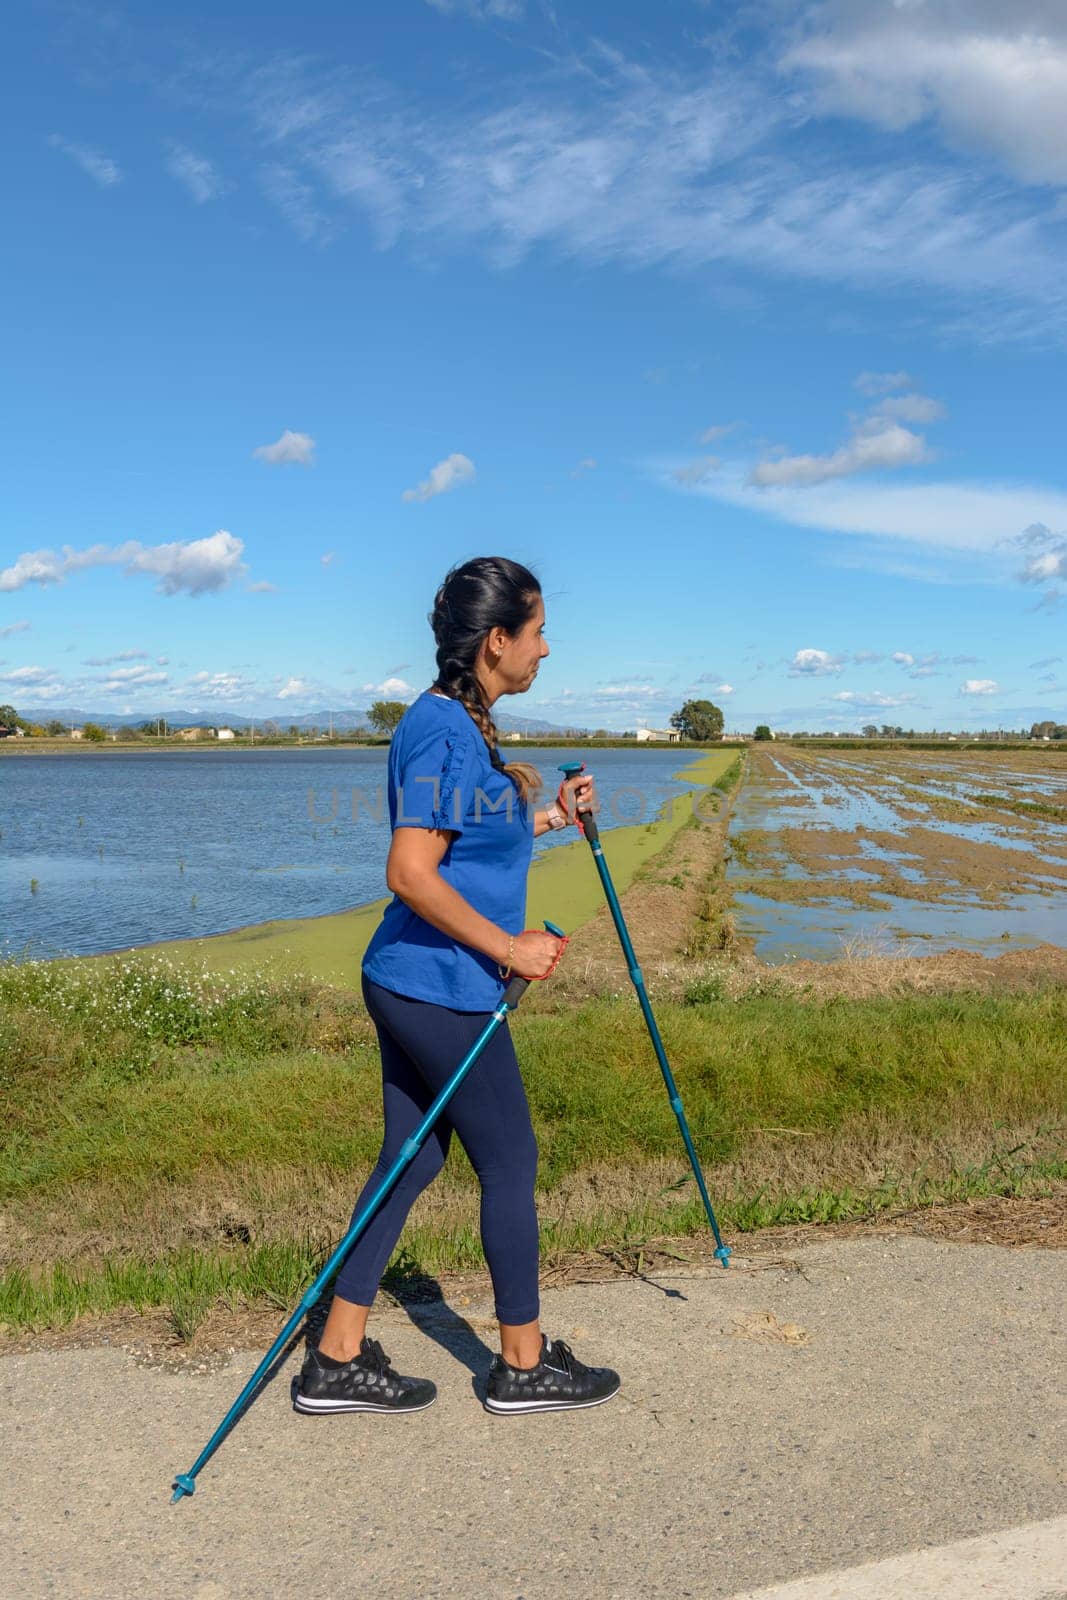 A woman in a blue shirt Nordic walking along a waterway on a sunny day with a clear blue sky, Hispanic latin woman walking with trekking poles in the Ebro Delta natural park, Tarragona, Catalonia, Spain,